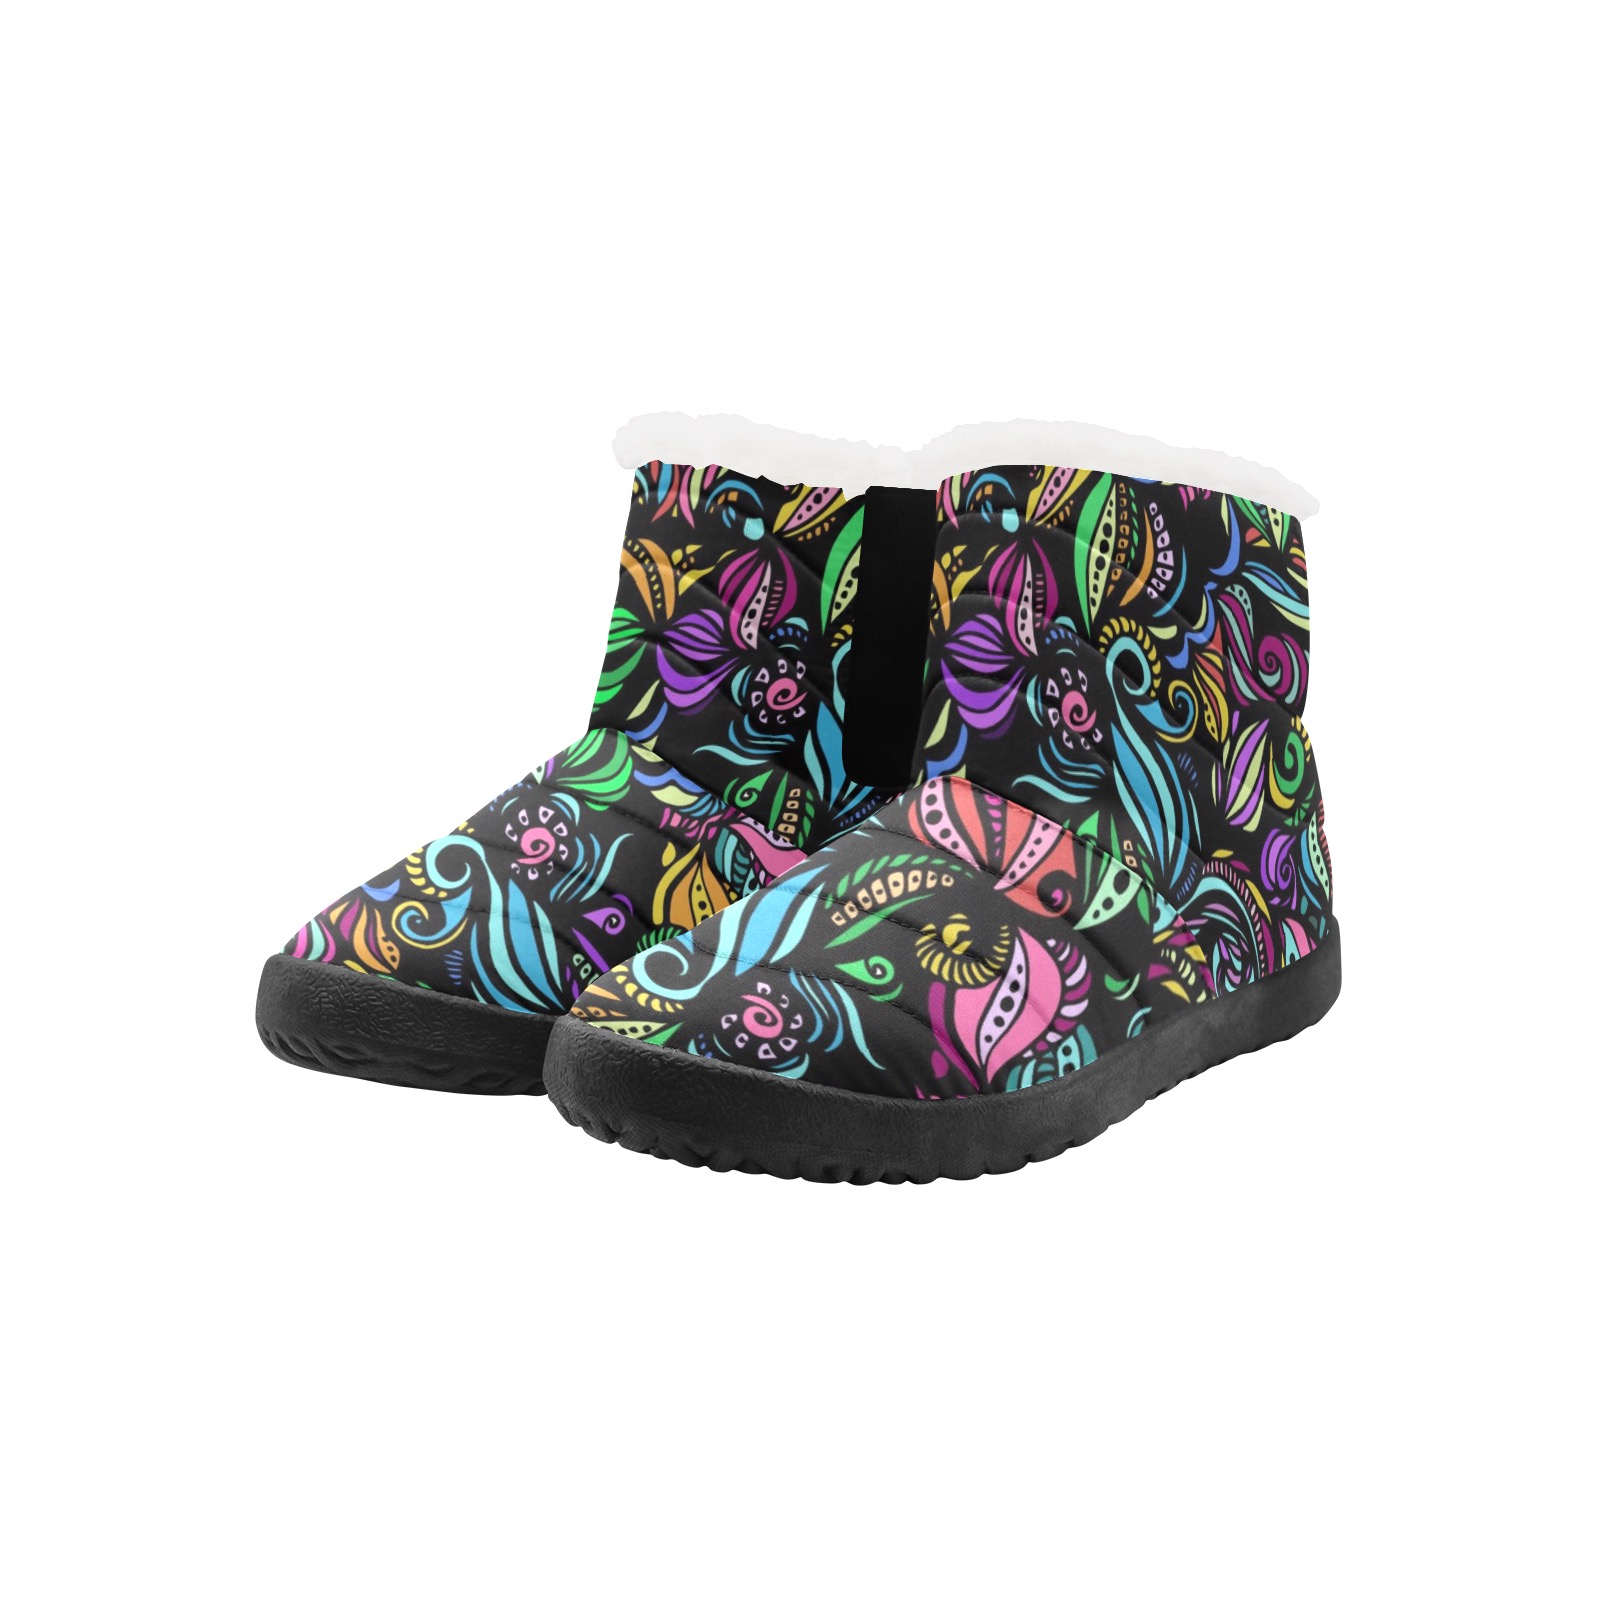 Whimsical Blooms Women's Cotton-Padded Shoes (Model 19291)